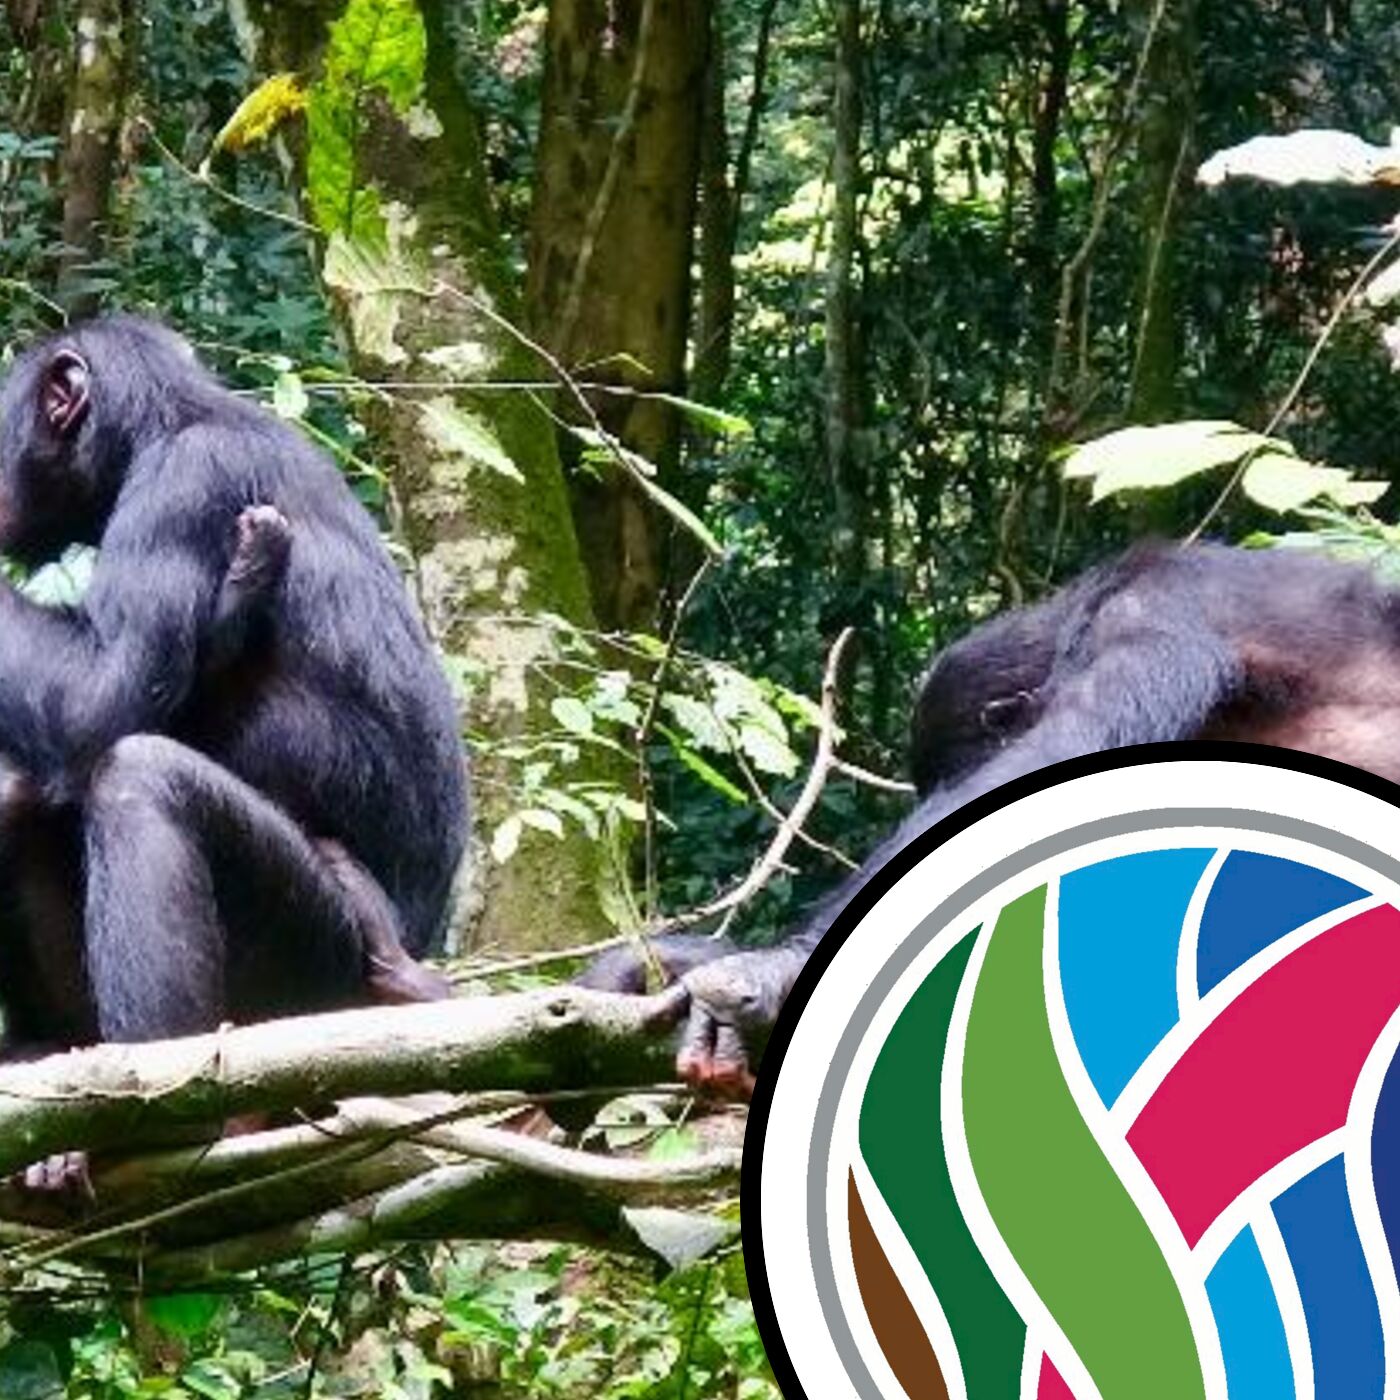 Prostate cancer prediction and bonobo culture